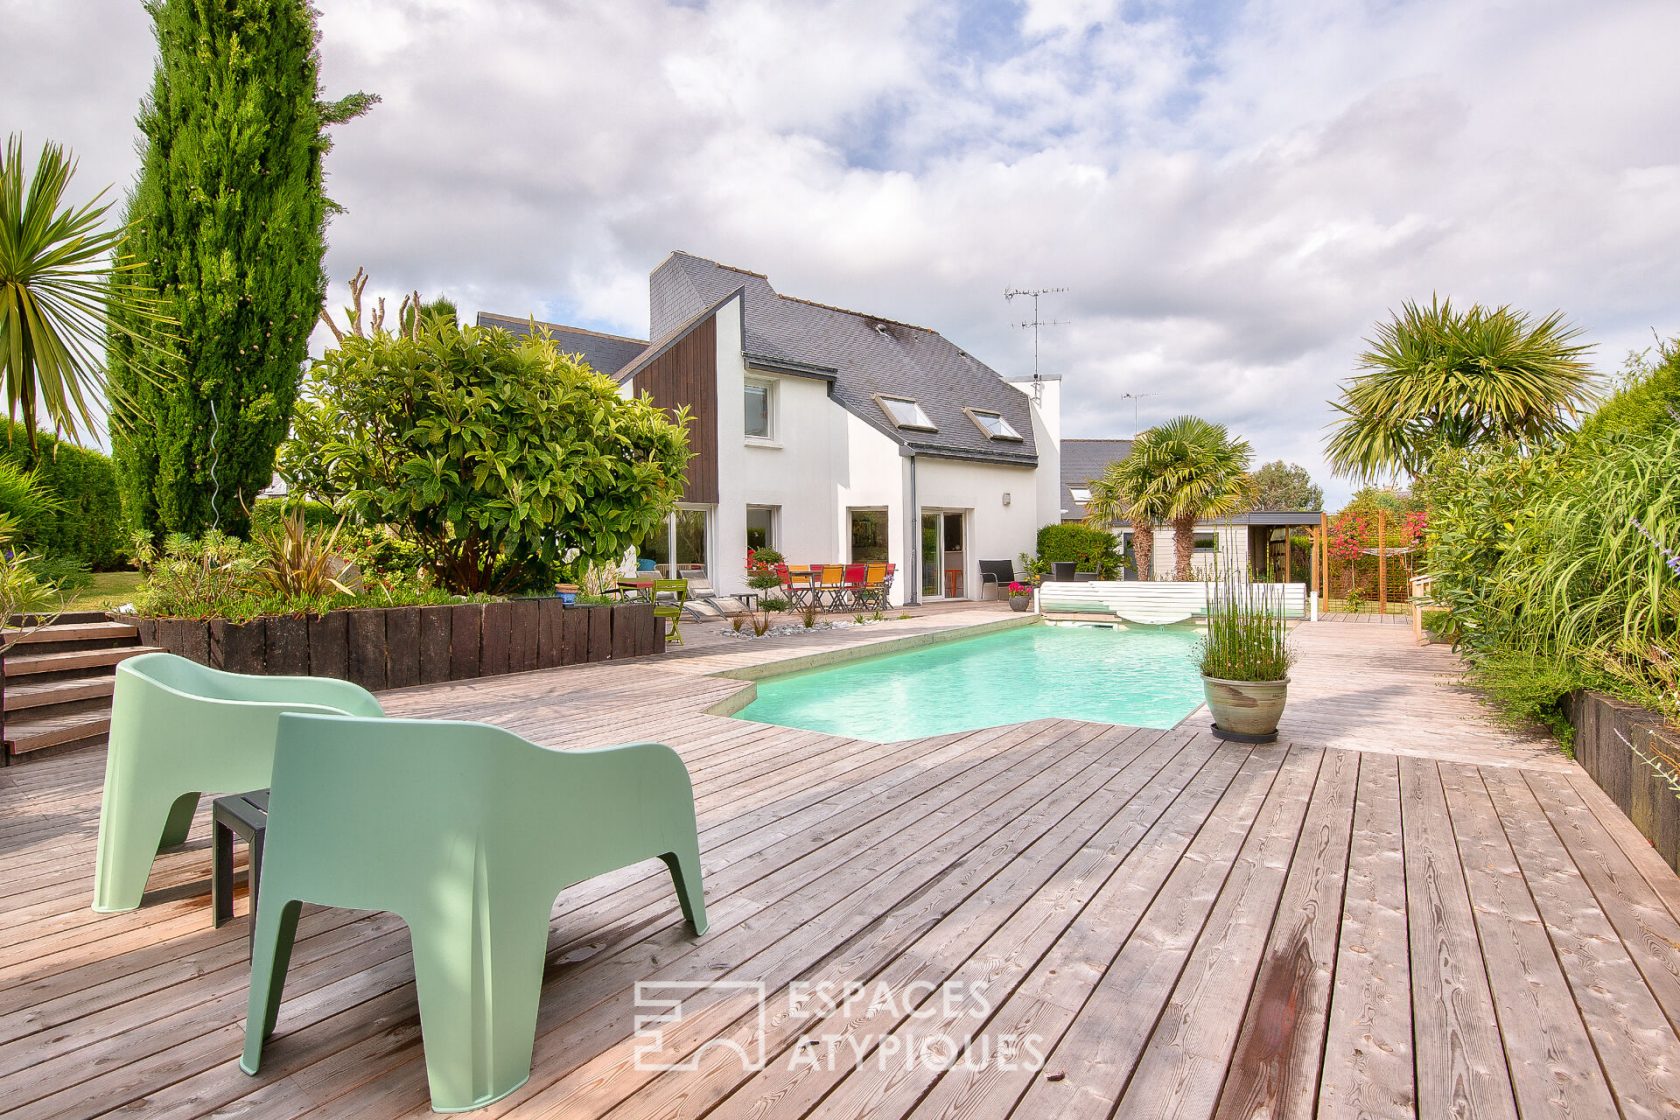 LA COQUETTE: tastefully decorated house with swimming pool and beach on foot